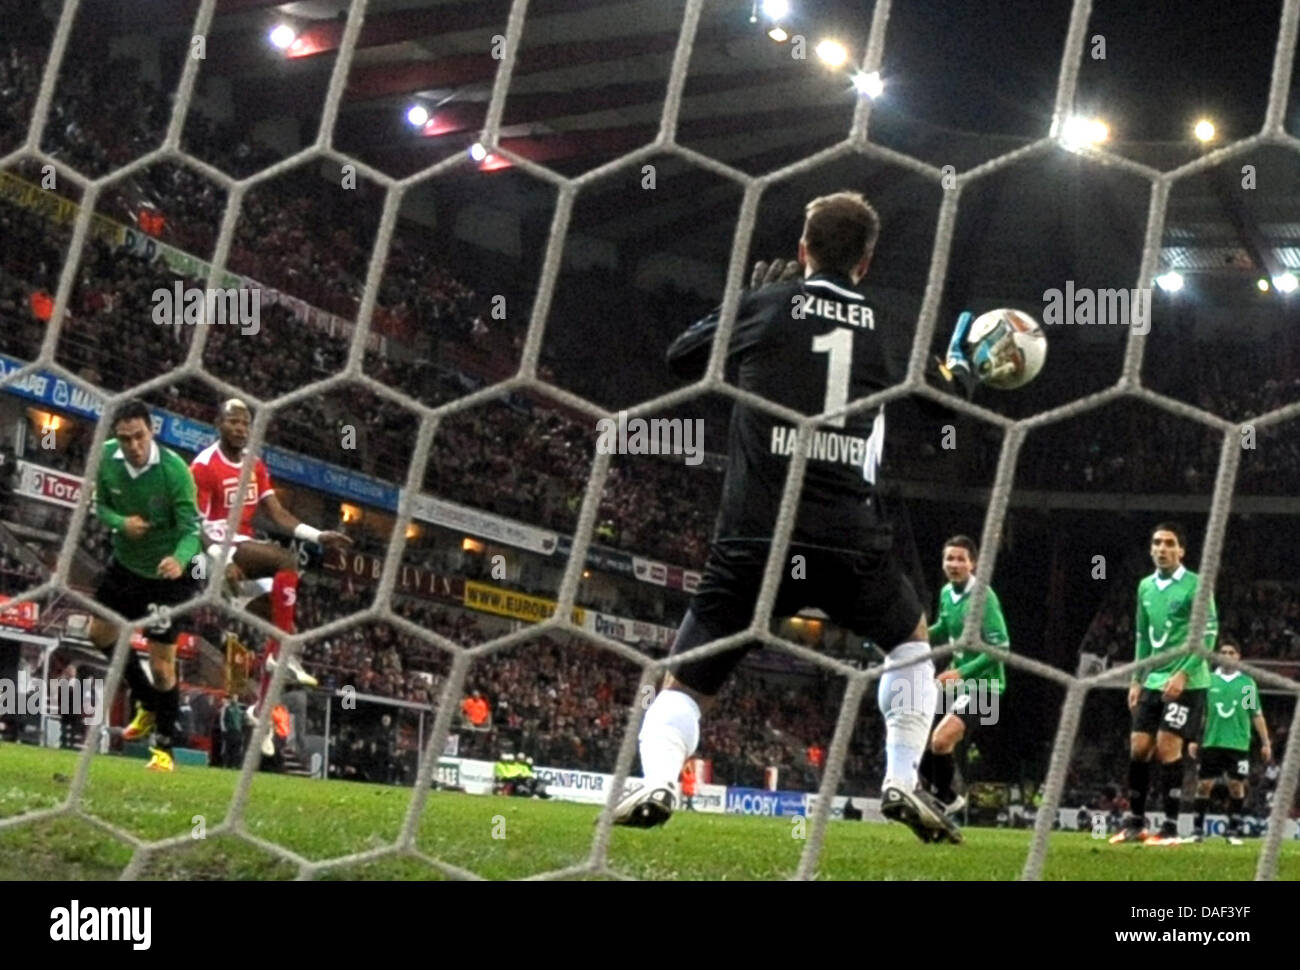 Liege's Mohammed Tchite (2 nd L) scores the 1-0 lead against Hanover's goalkeeper Ron-Robert Zieler during their Europa League Group B match Standard de Liege vs Hanover 96 at the Maurice Dufrasne stadium in Liege, Belgium, 30.11.2011. Photo: Federico Gambarini dpa  +++(c) dpa - Bildfunk+++ Stock Photo